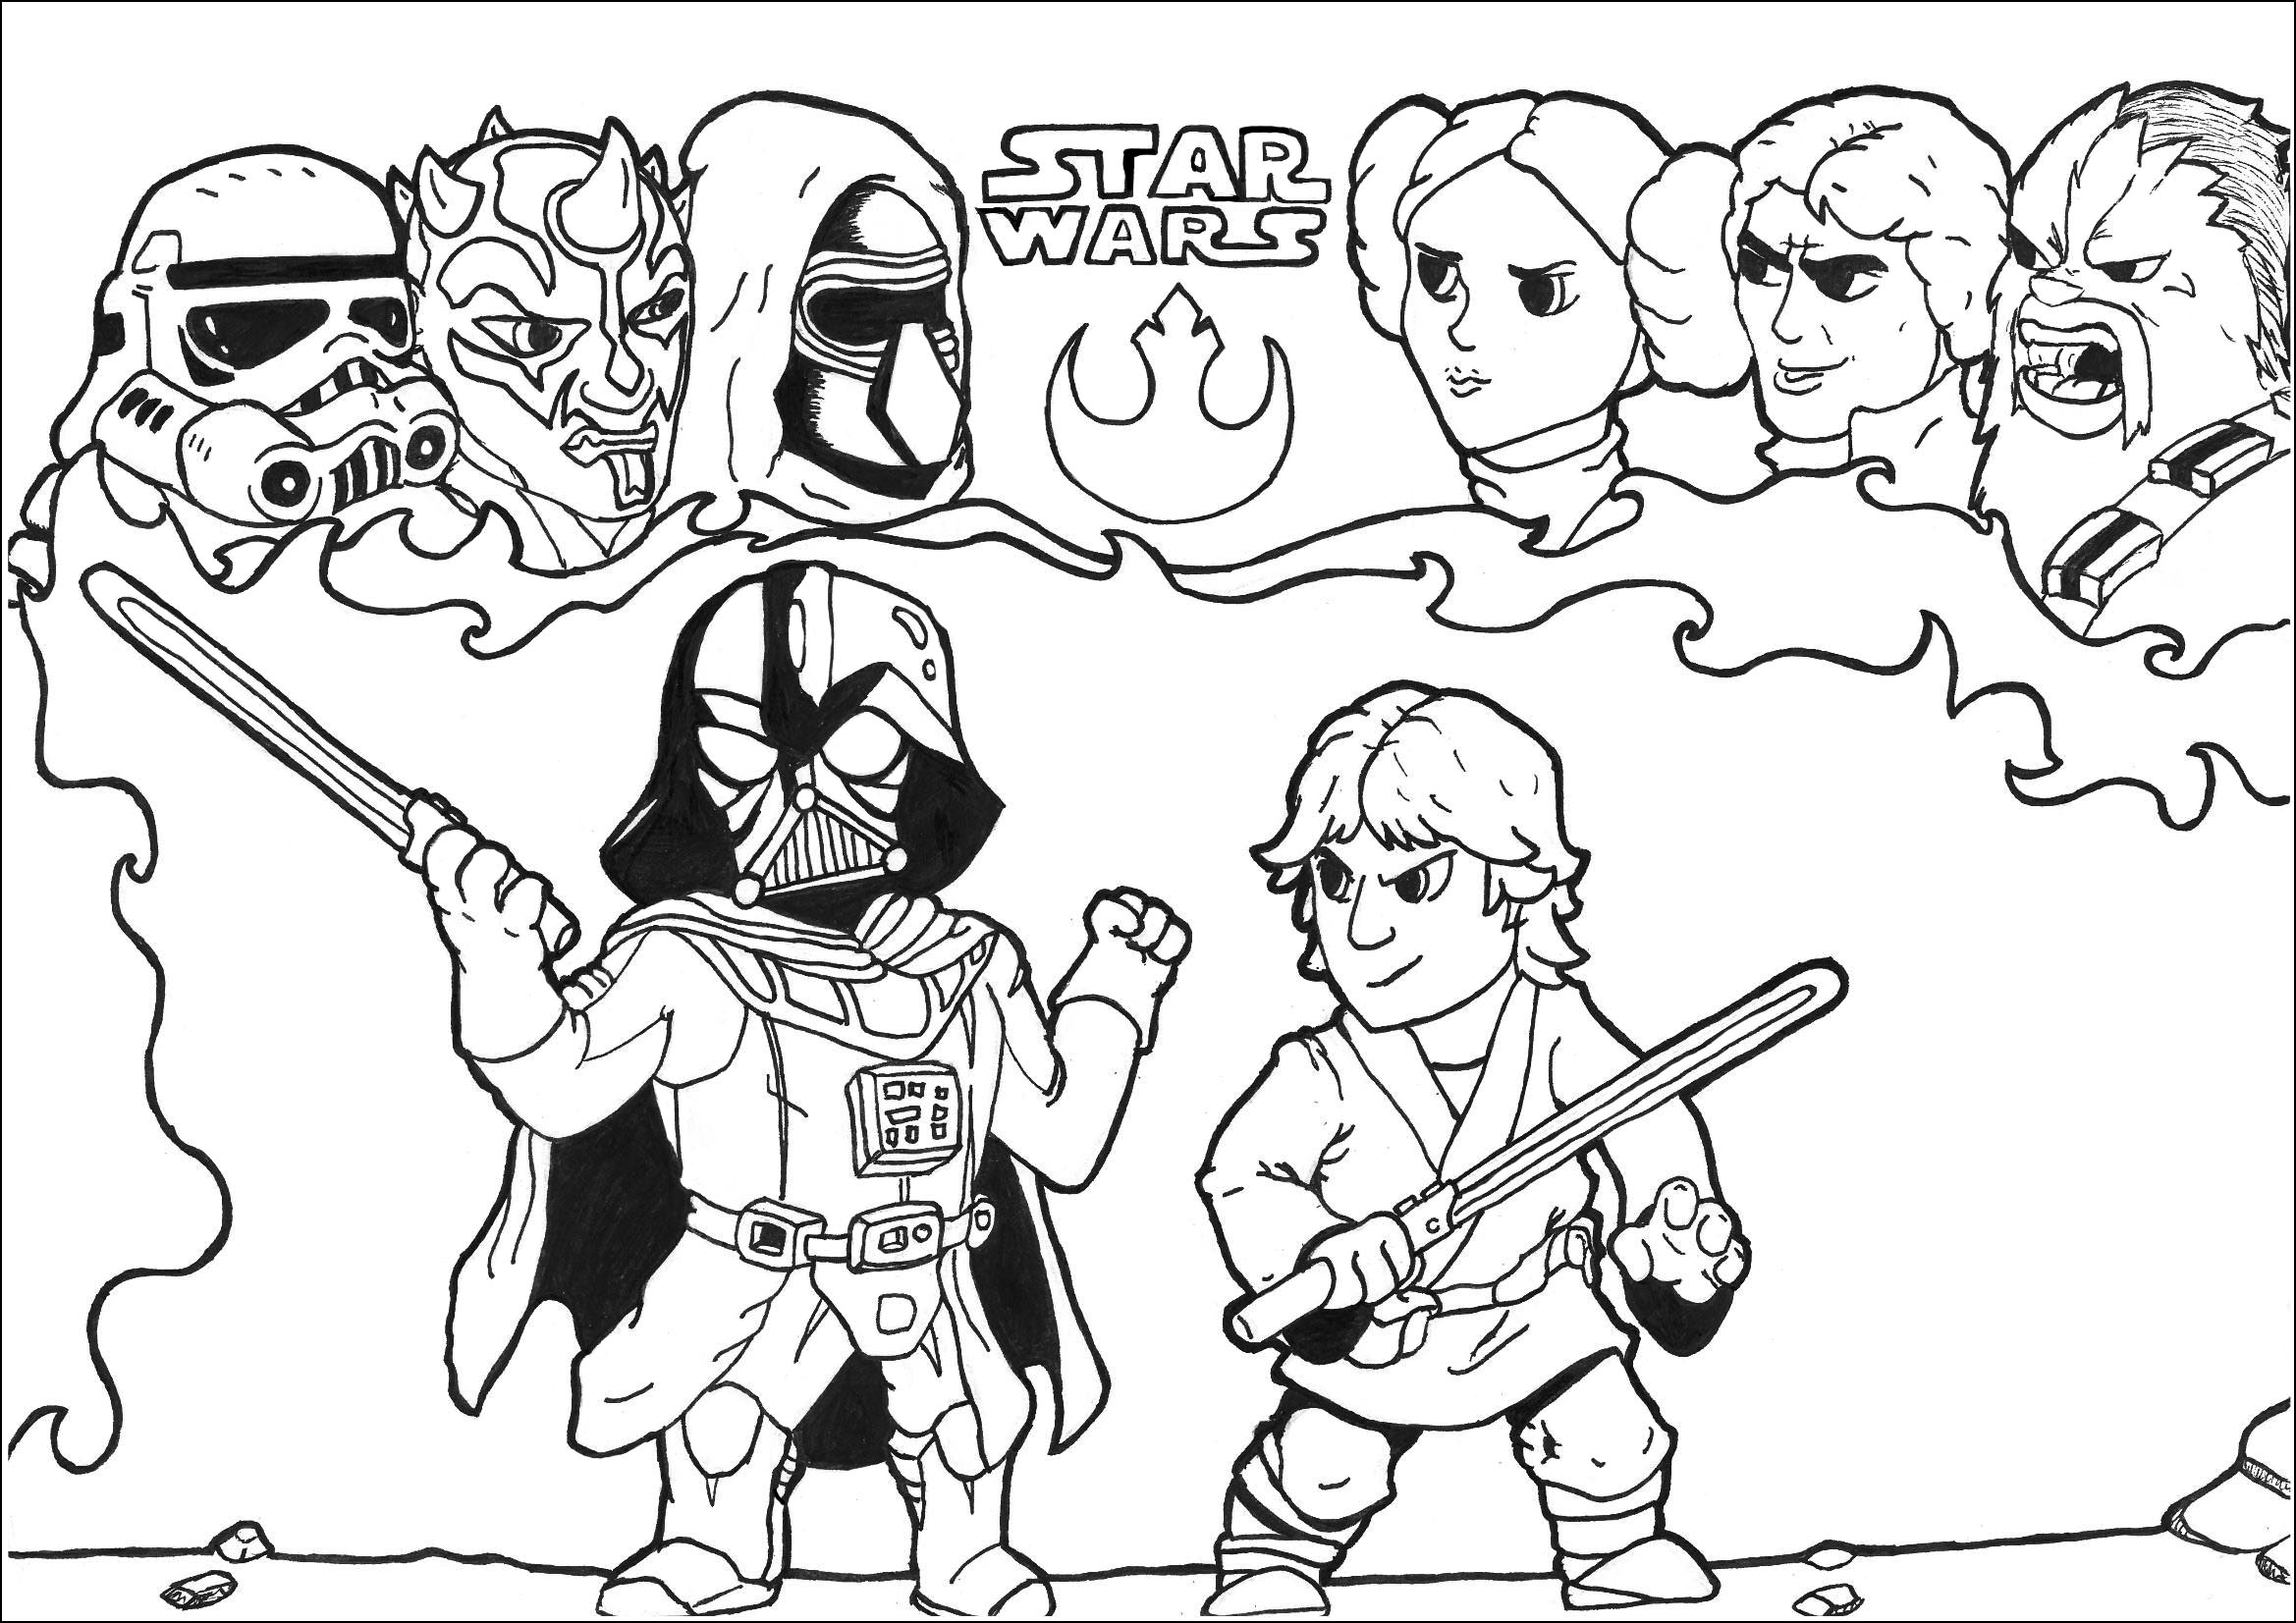 stars wars coloring pages star wars free to color for kids star wars kids coloring pages wars stars coloring 